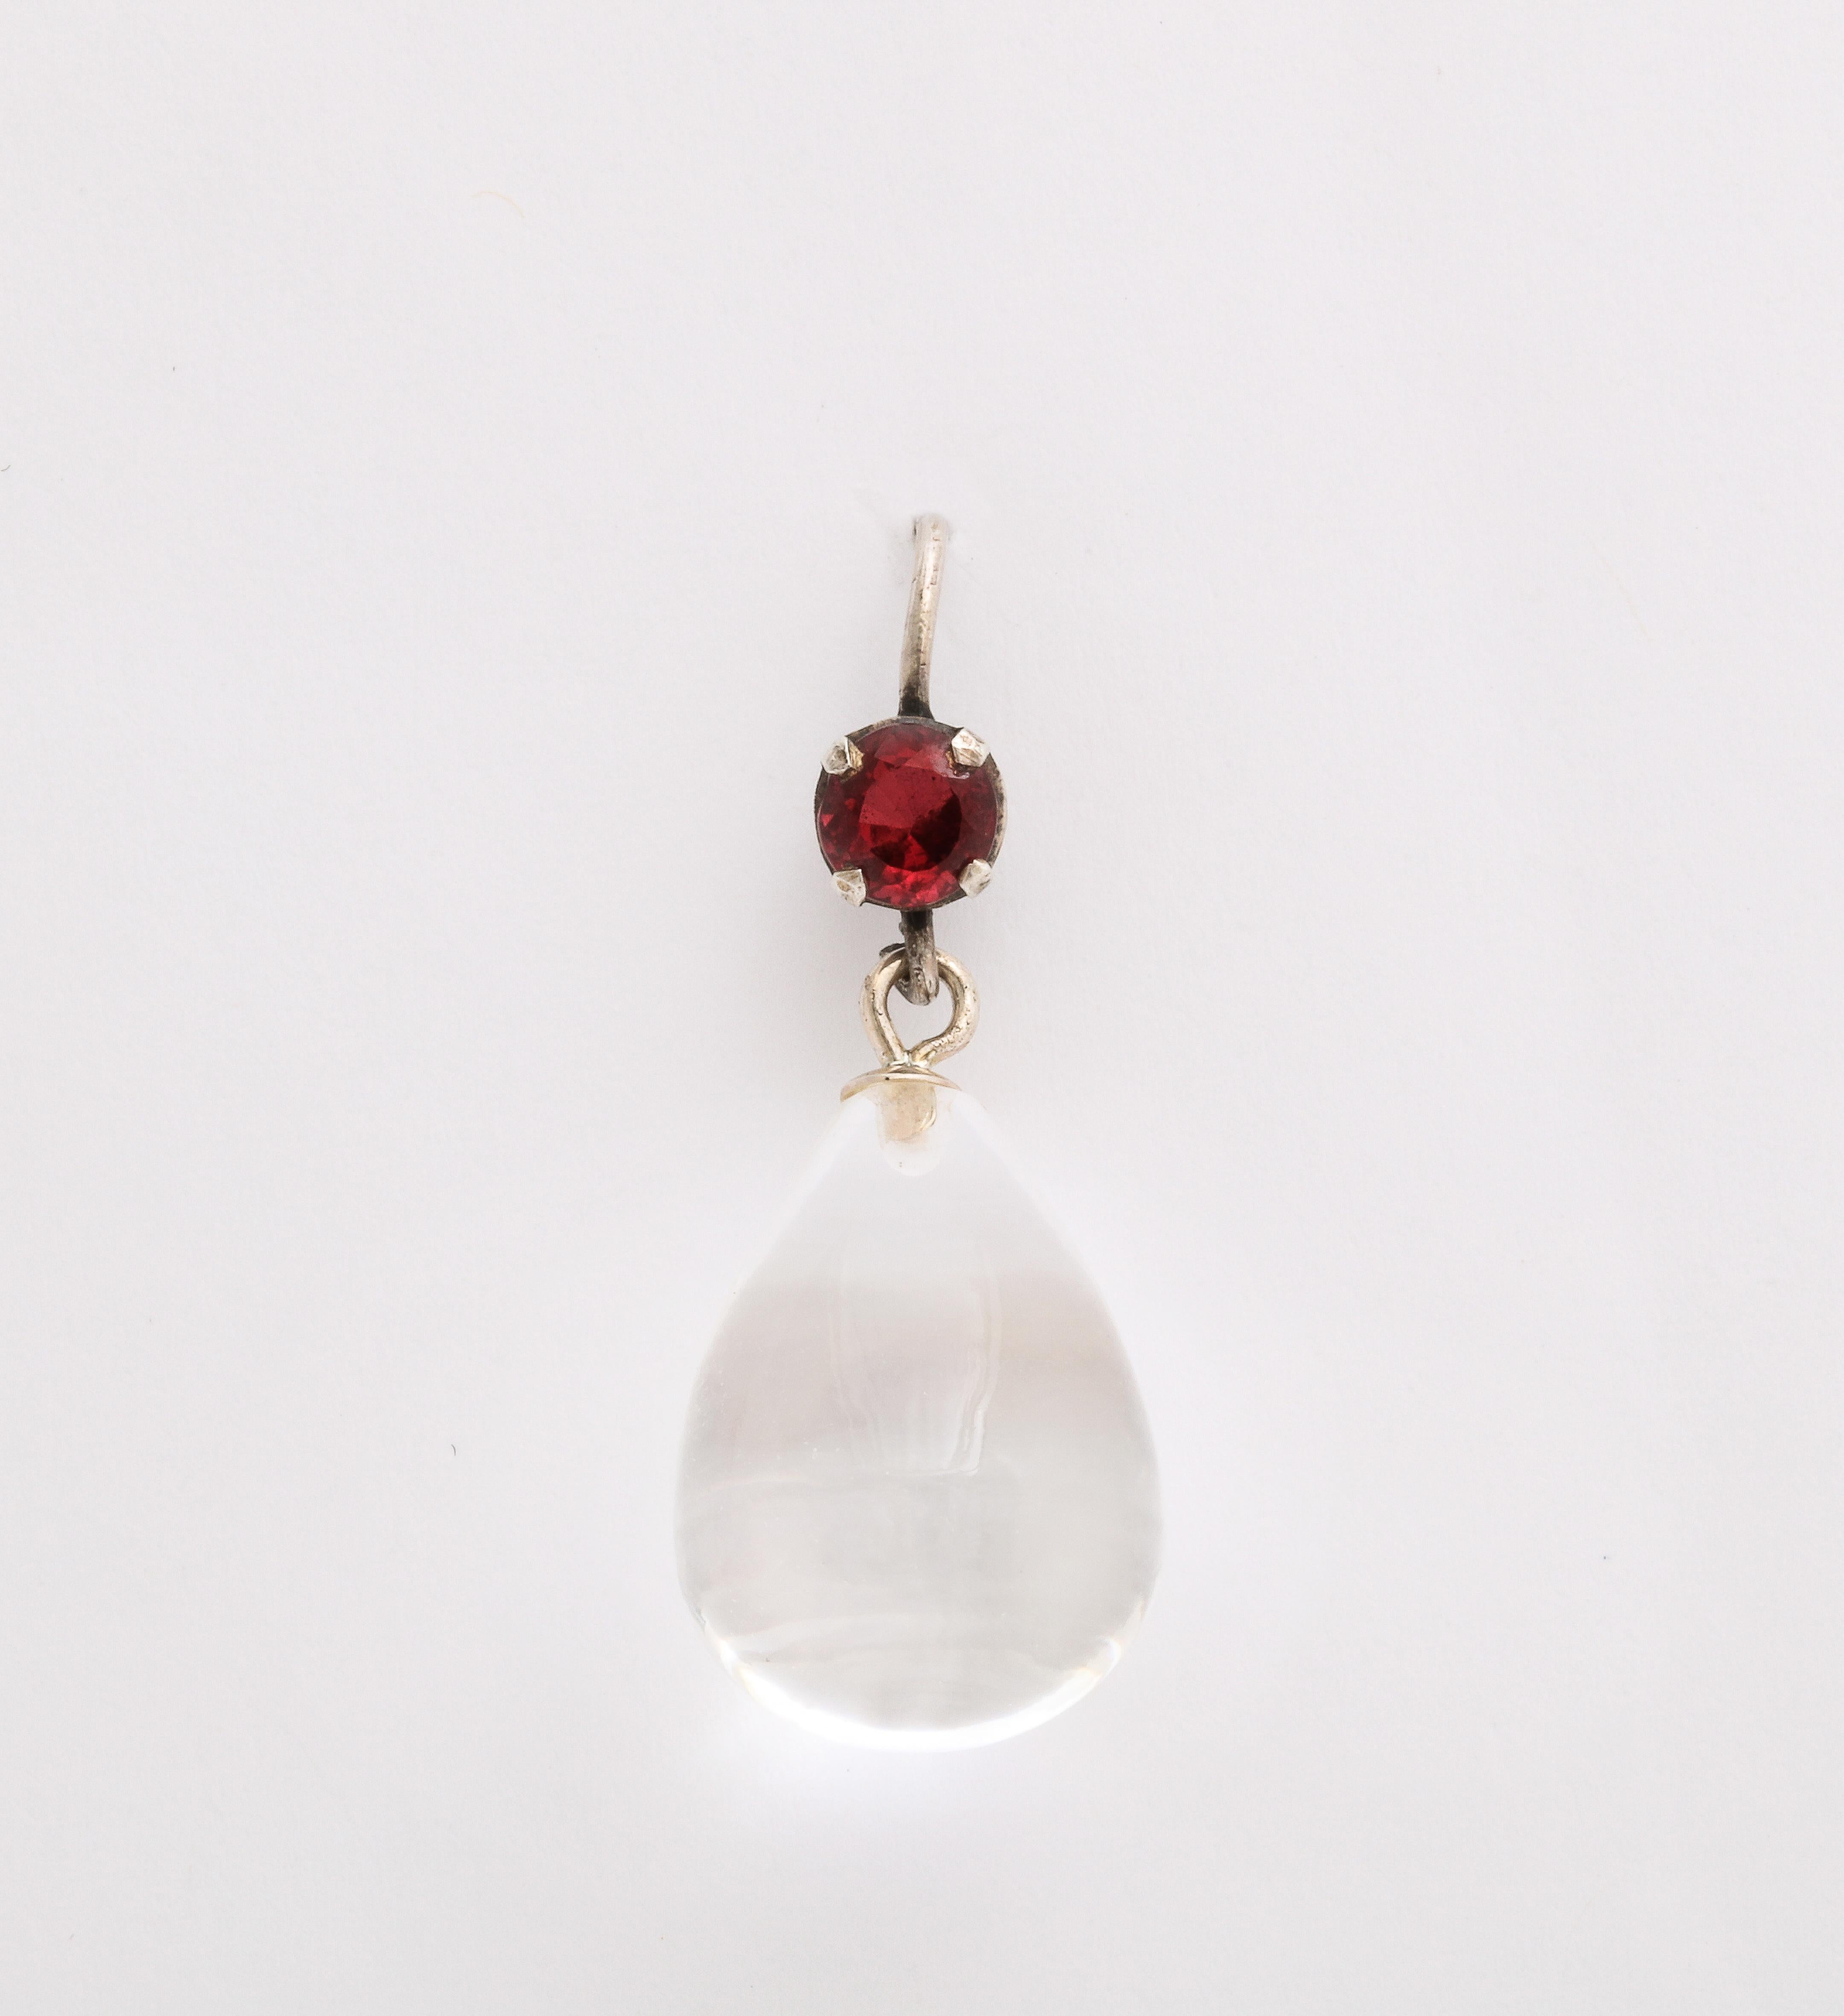 The many who appreciate the qualities of rock crystal will delight in these sterling set rock crystal earrings. An ovoid clear crystal is topped by a round garnet. The color combination is perky. Wear them day, night and always. Rock crystal is